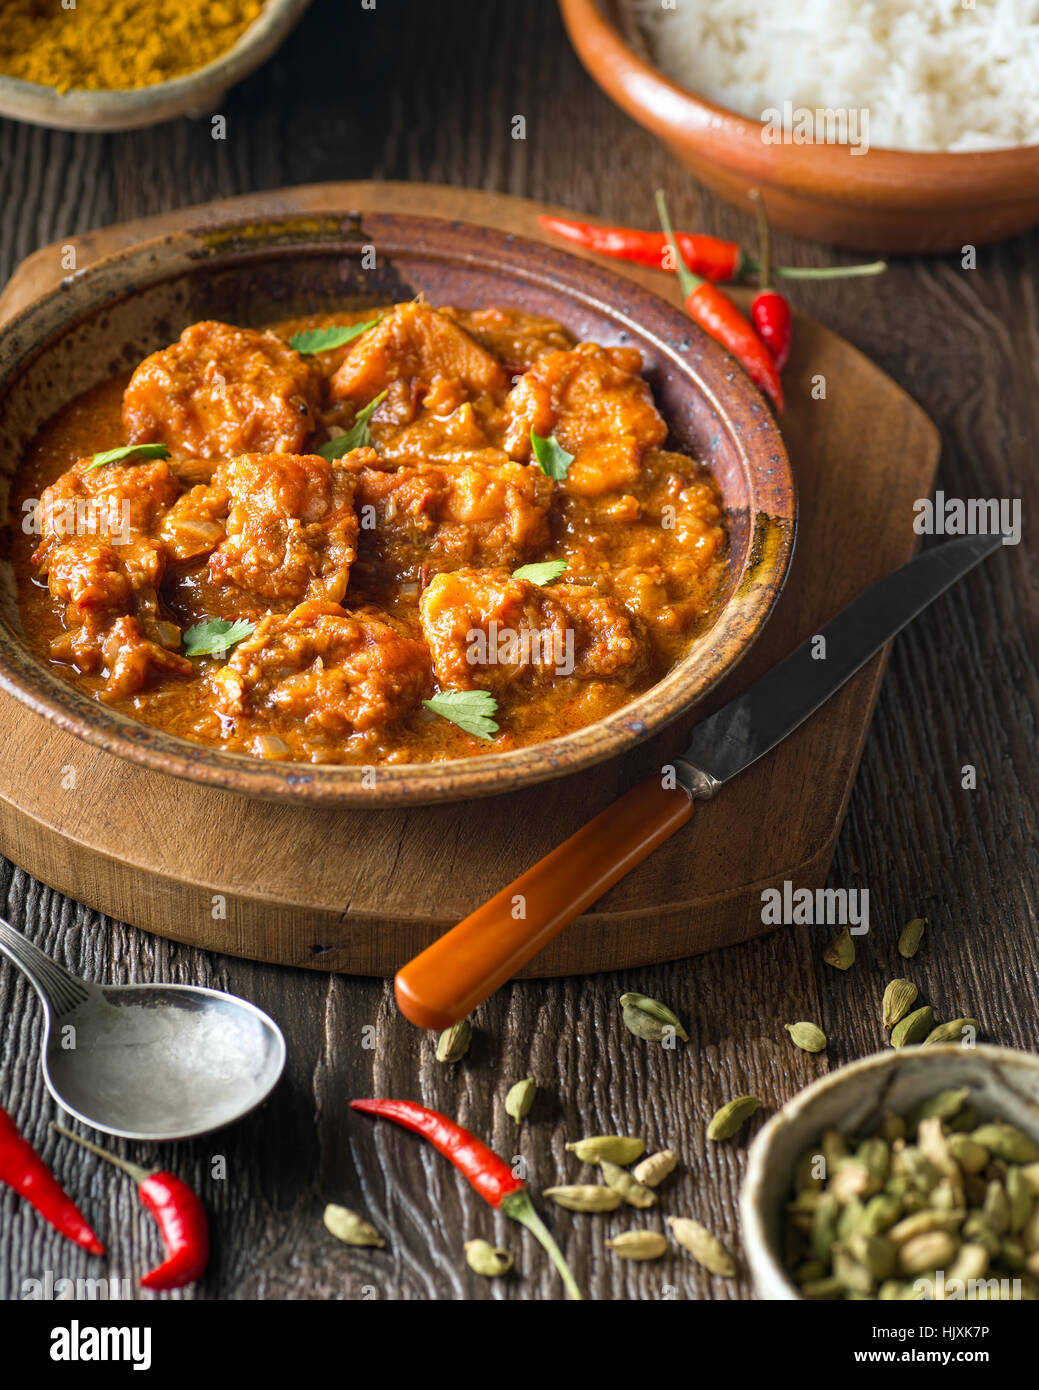 A delicious home made fish curry with chili peppers, cilantro, and basmati rice. Stock Photo